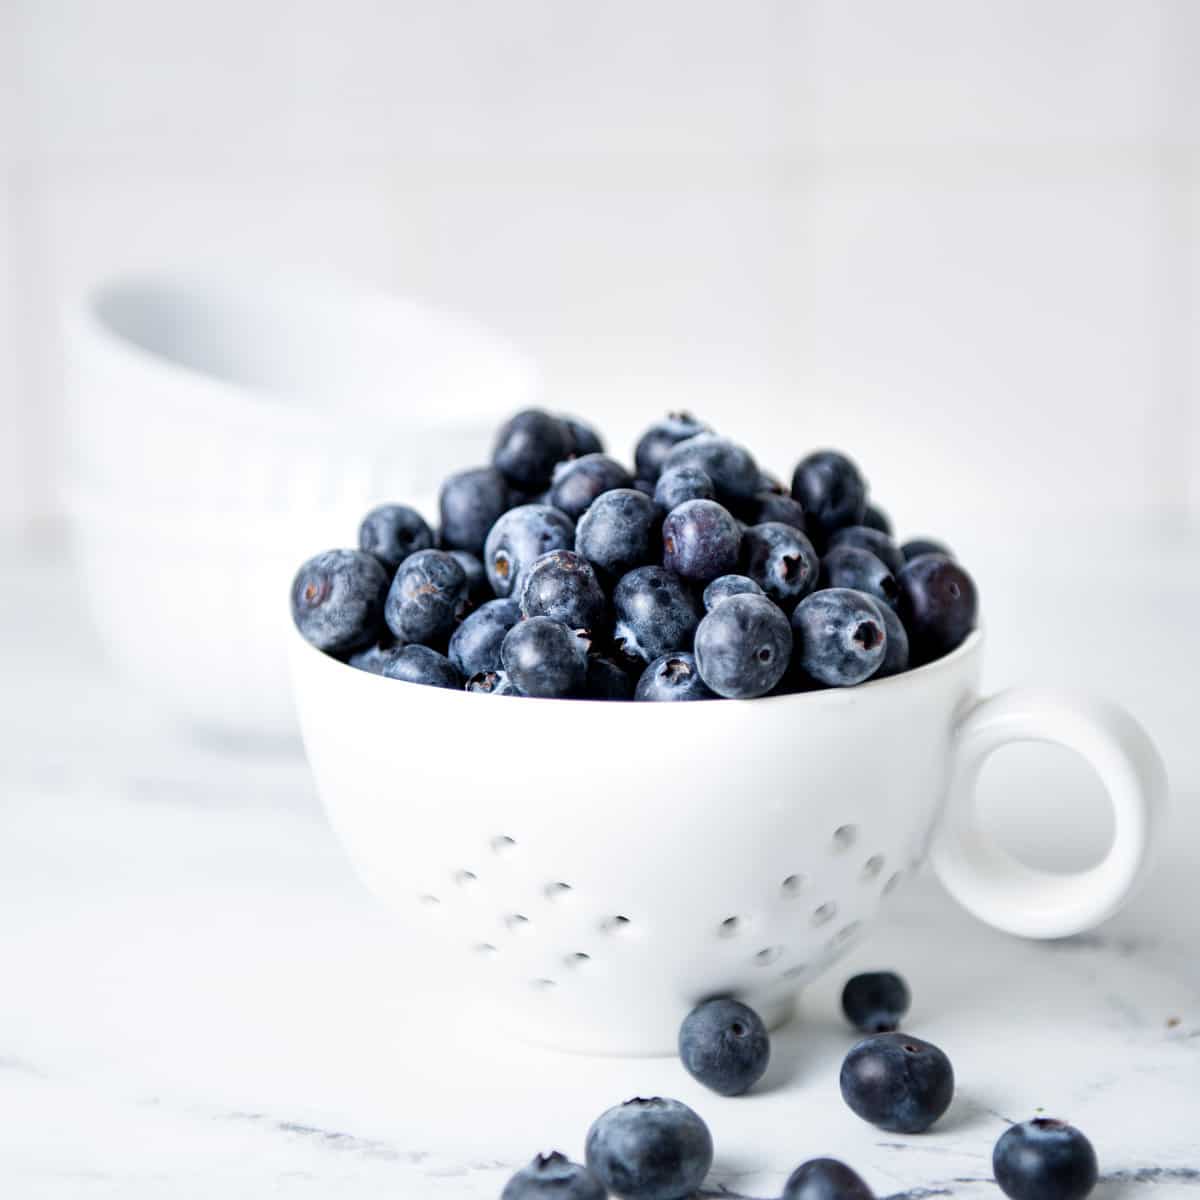 Blueberries in a white bowl.